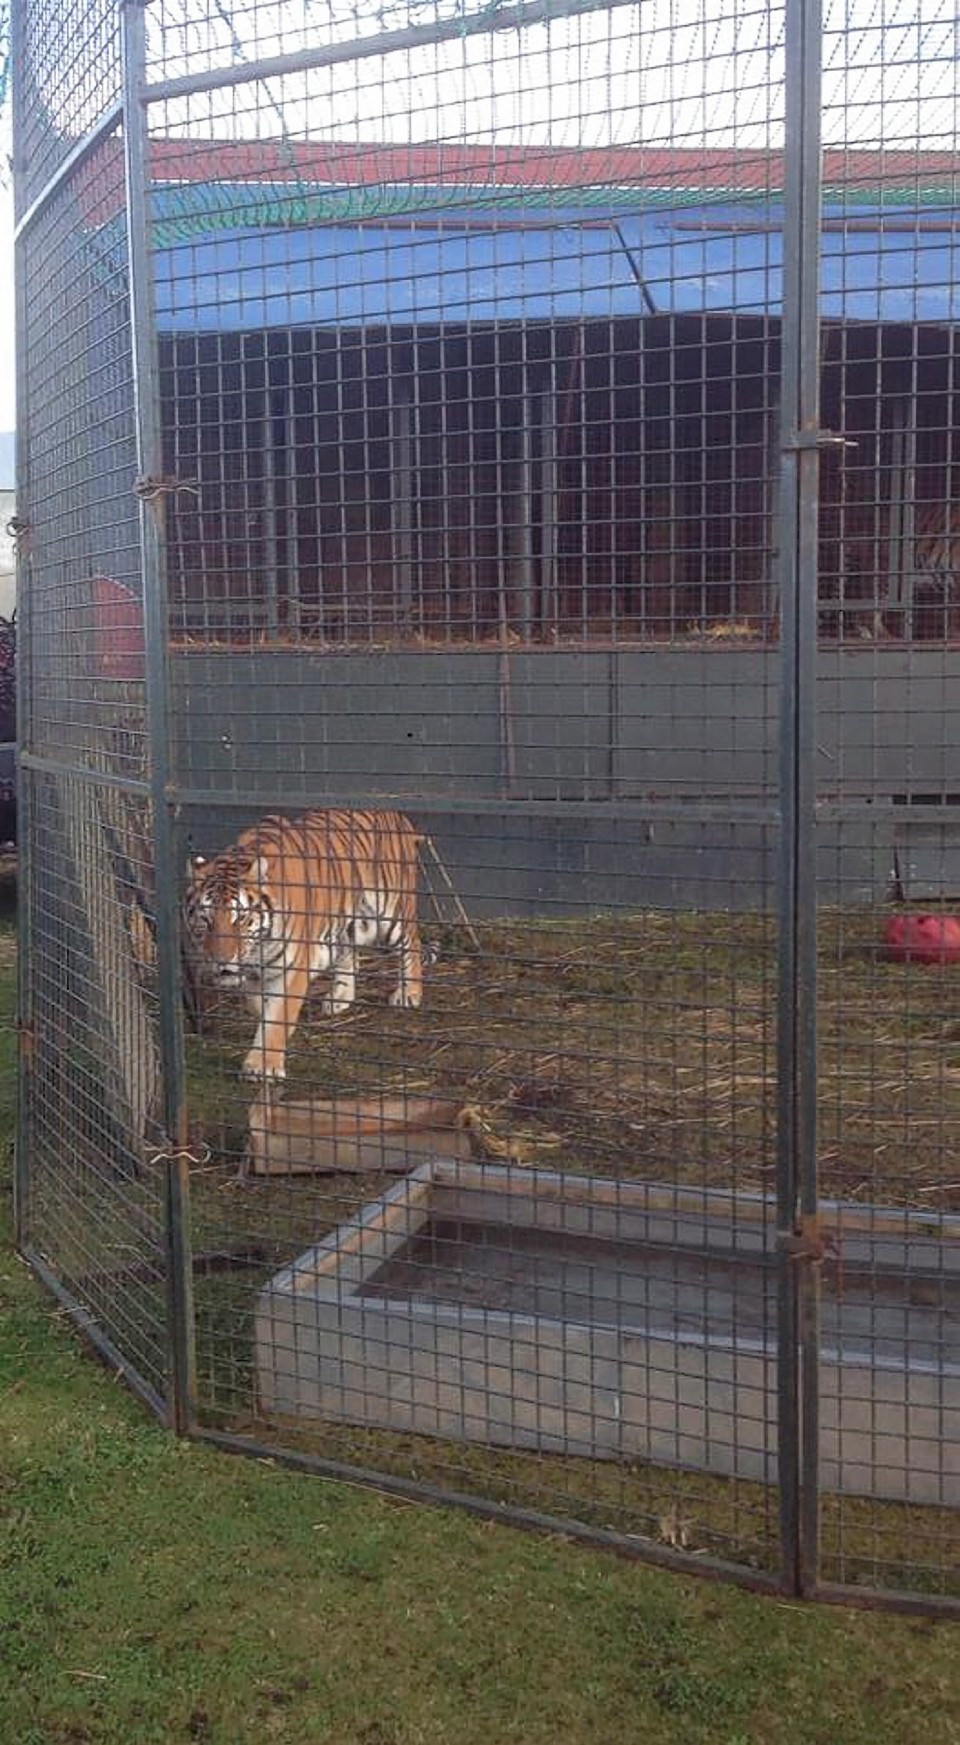 One of the three tigers staying at the farm over the winter